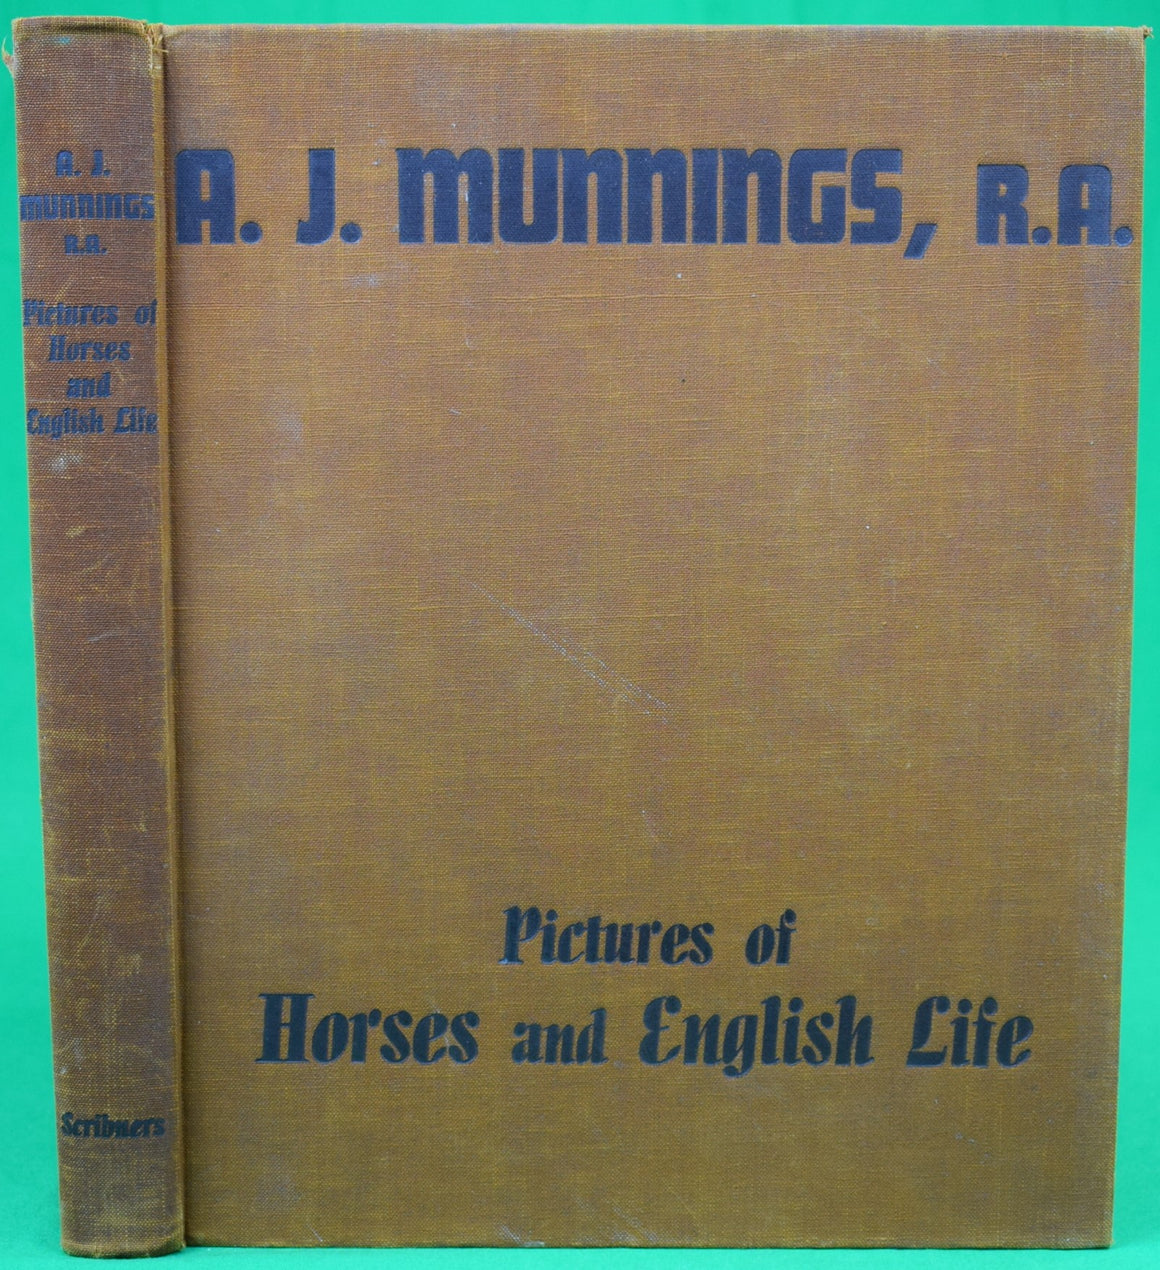 "Pictures Of Horses And English Life" 1939 MUNNINGS, A.J., R.A.